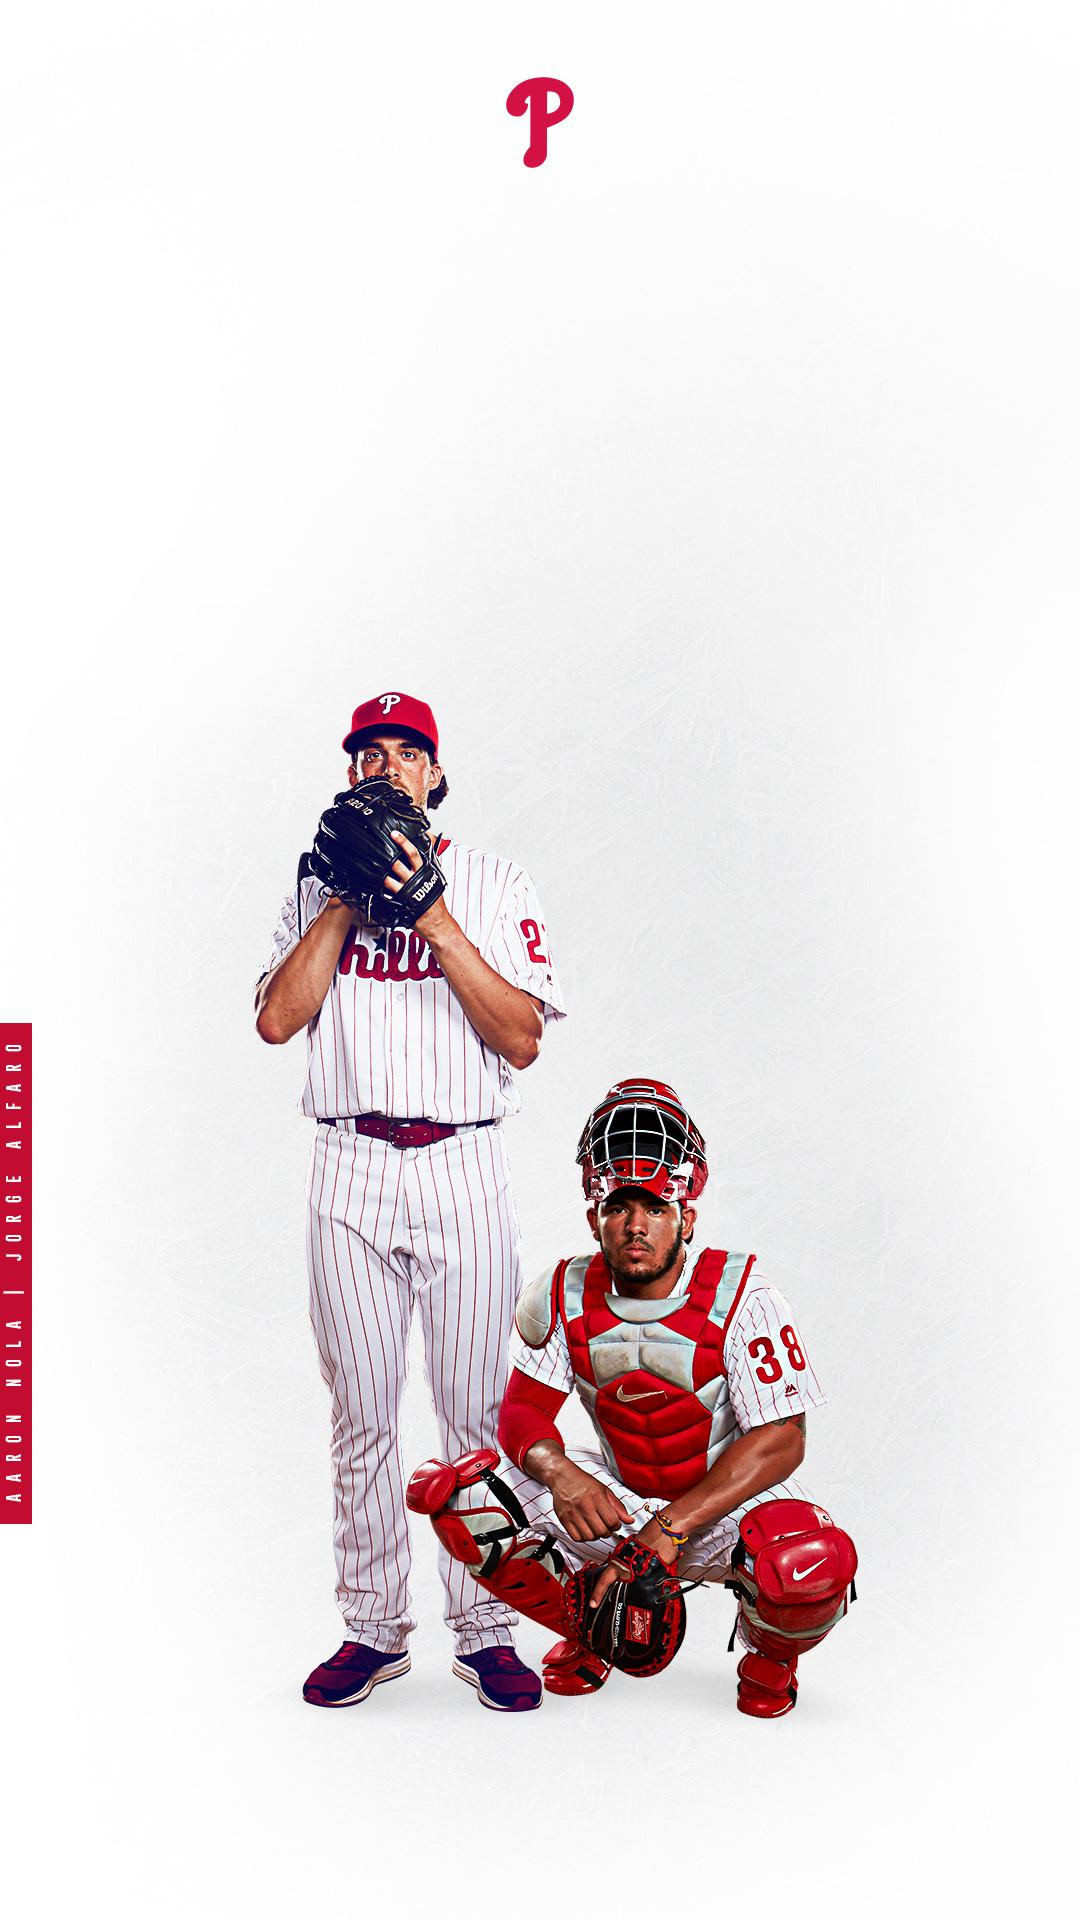 Phillies March Schedule Mobile phillies iPhone X Wallpapers Free Download